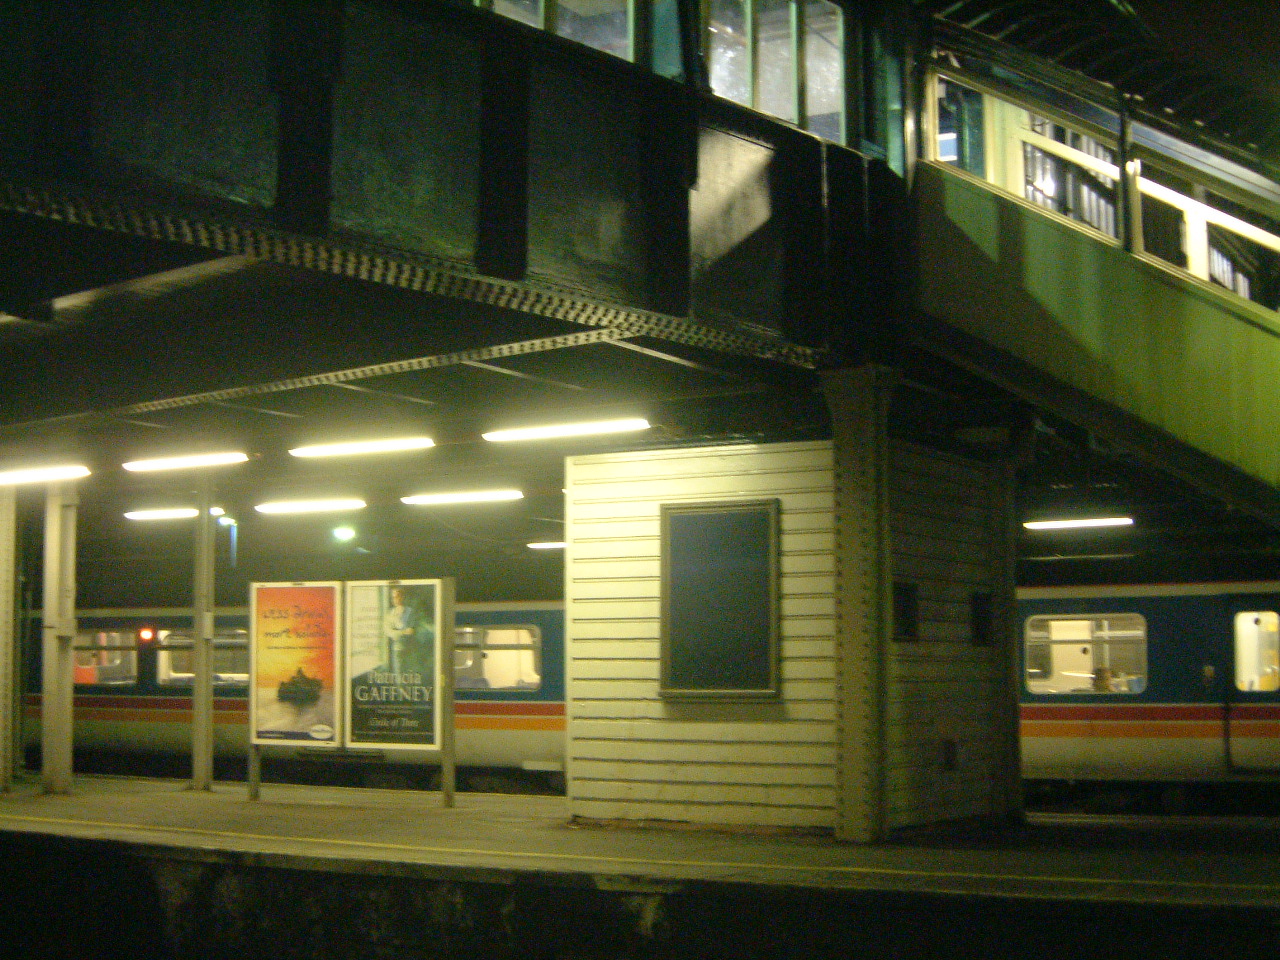 subway train approaching station at night, with subway stop